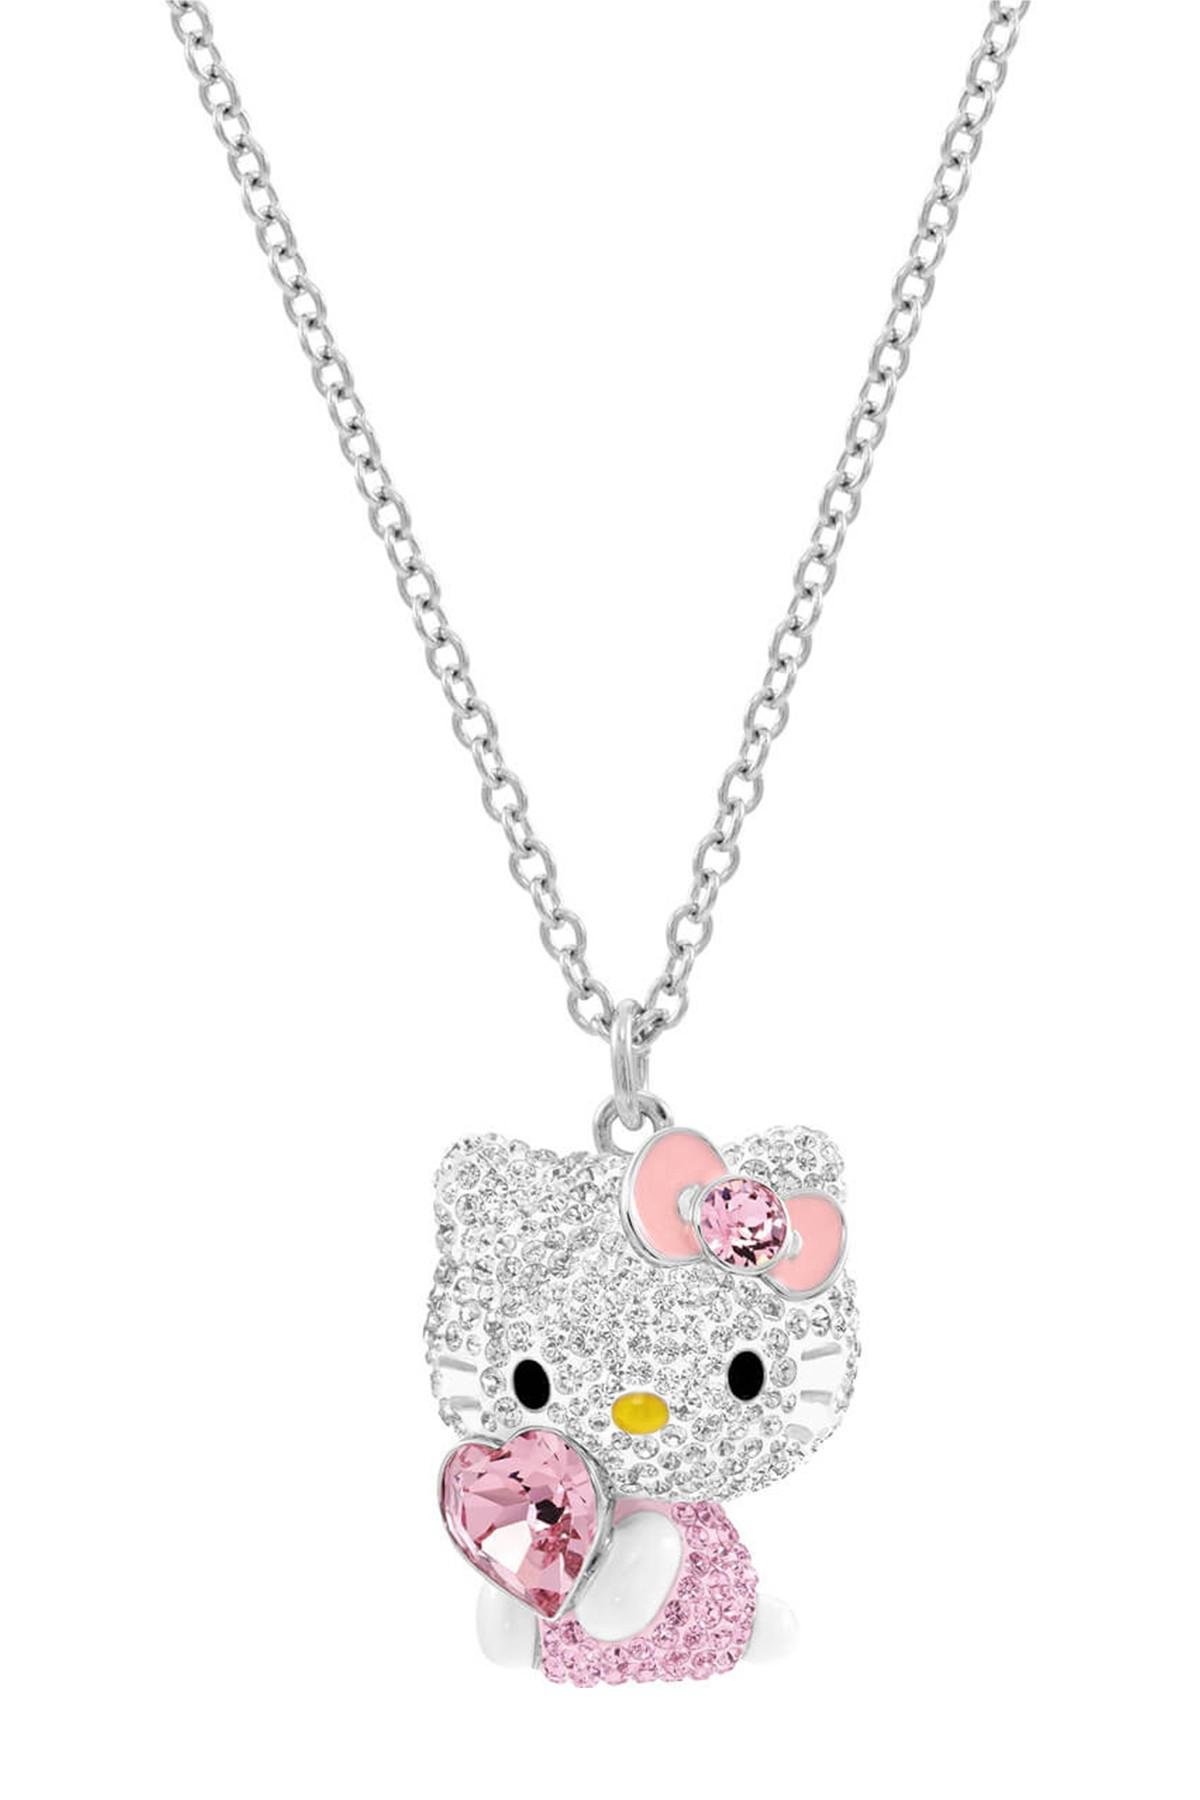 Swarovski Heart Pave Crystal Hello Kitty Pendant Necklace in Pink | Lyst